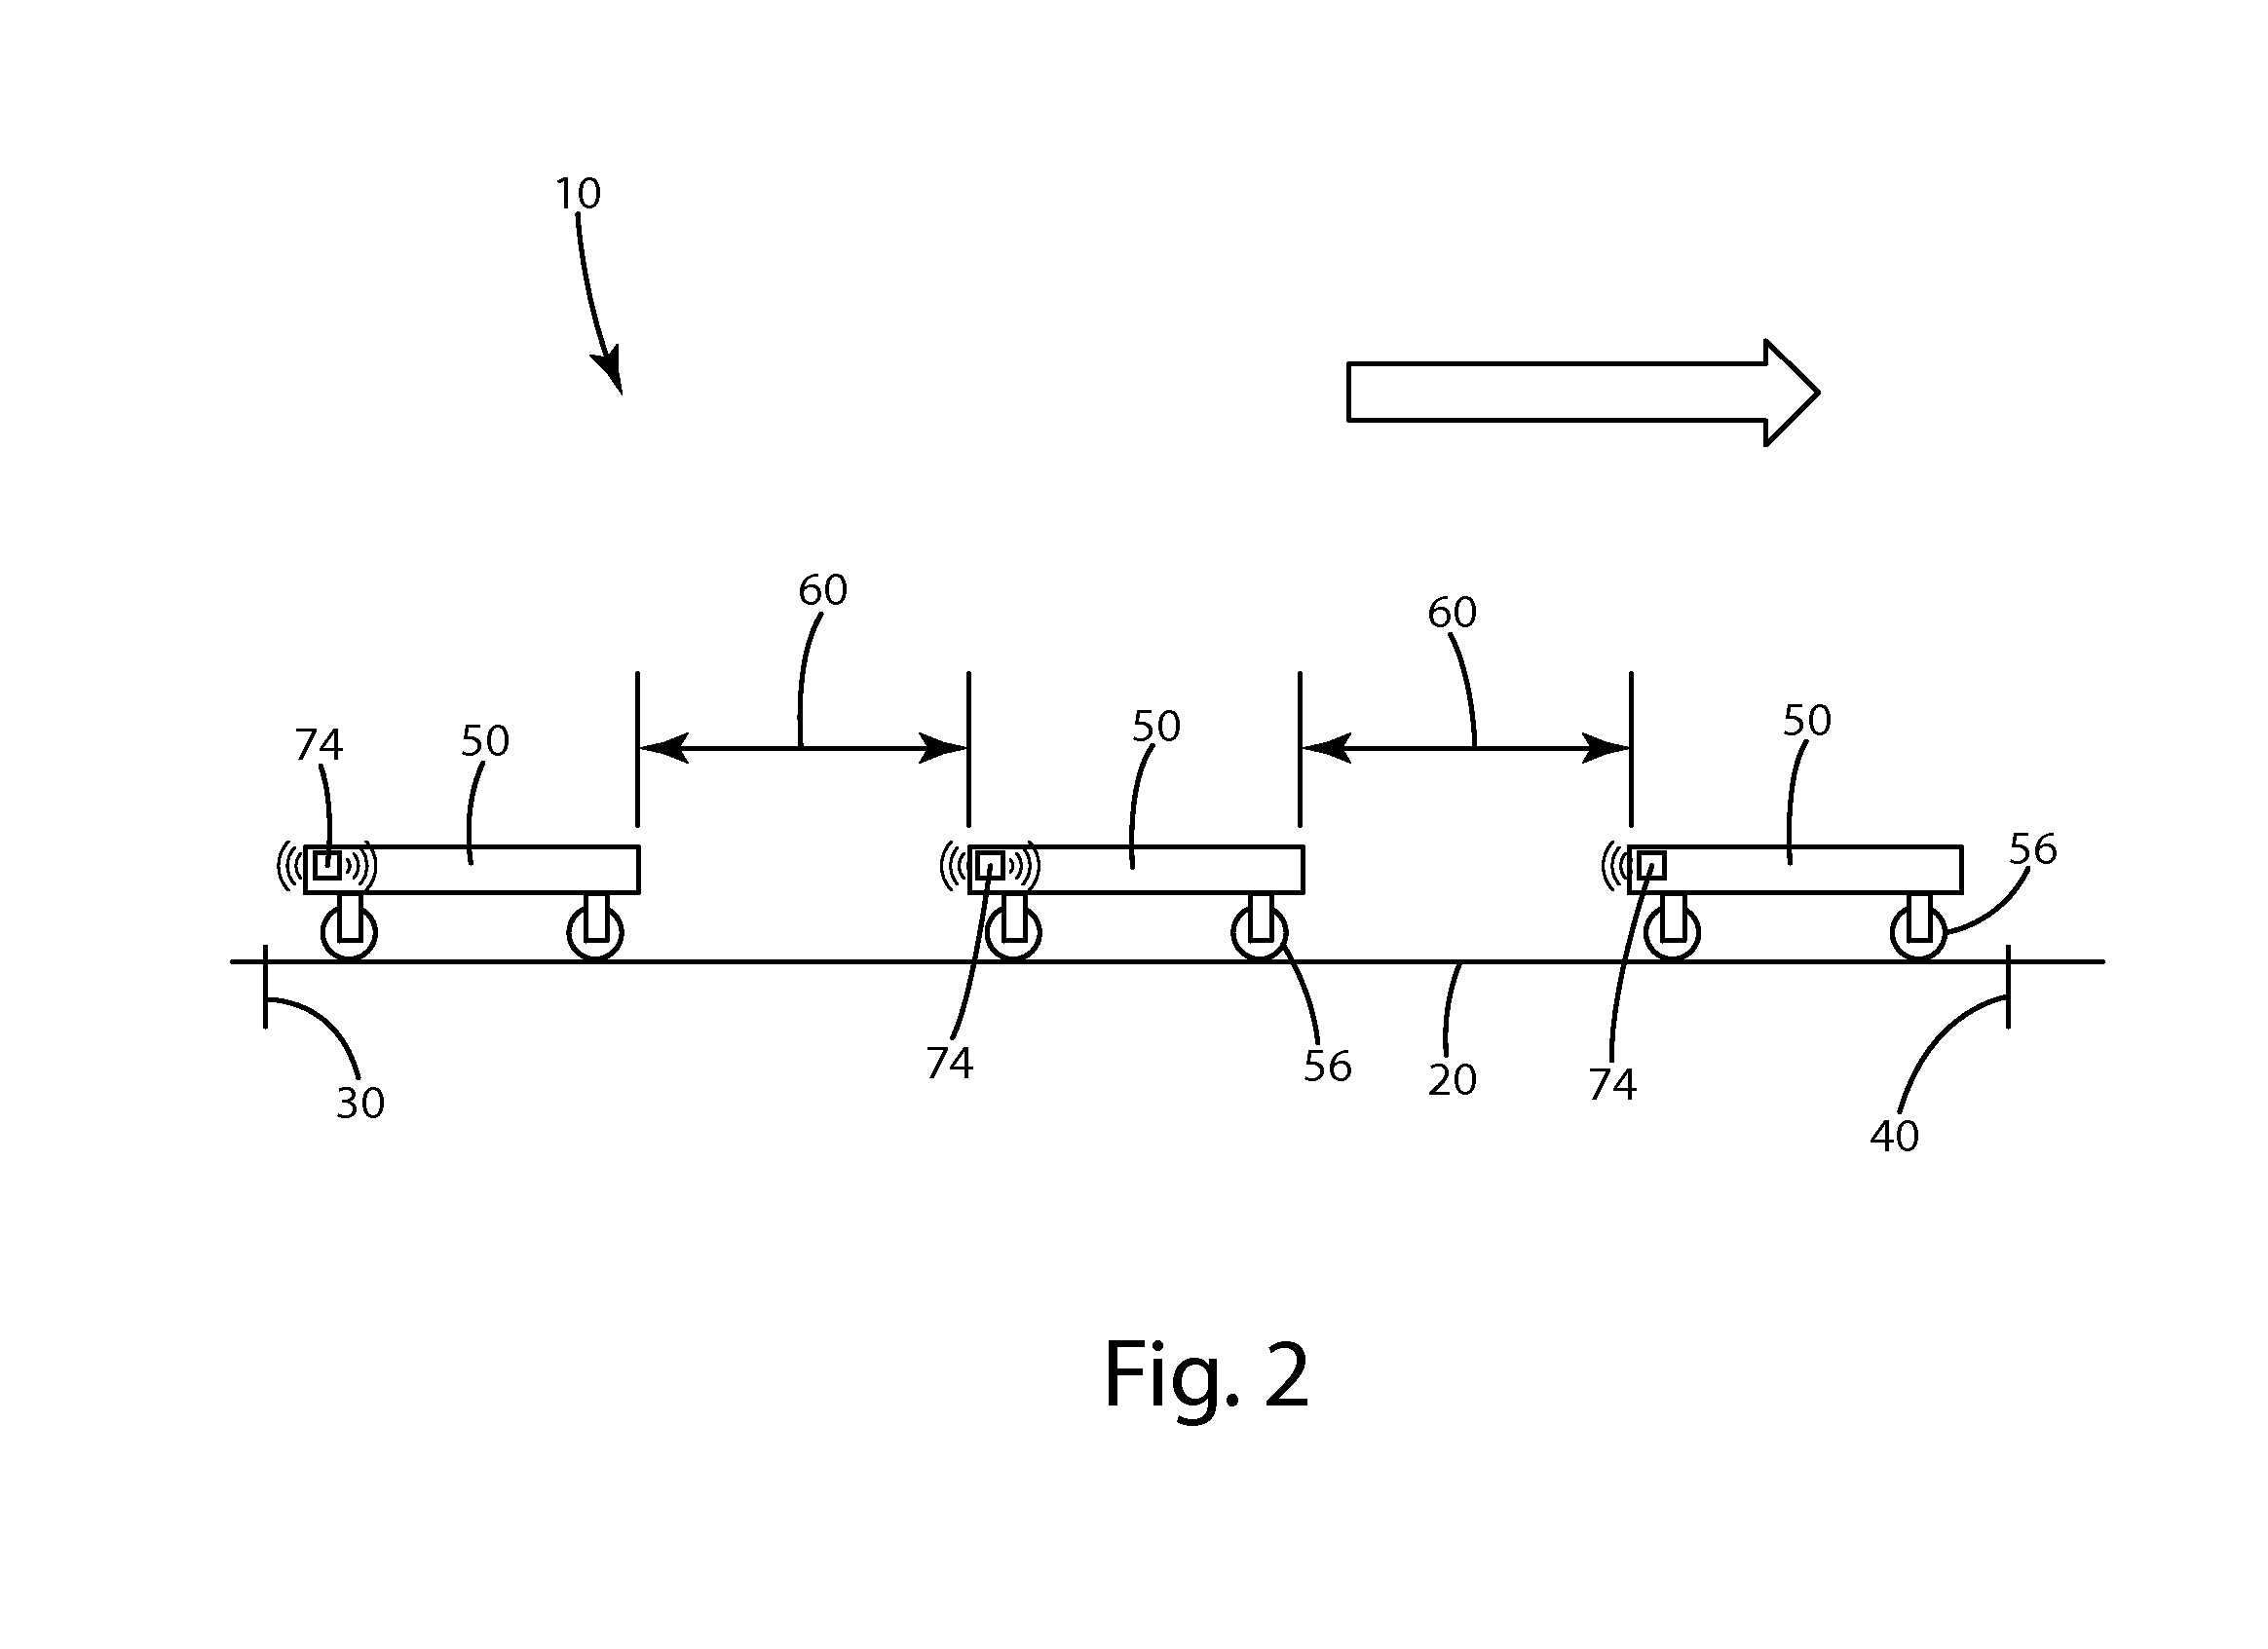 Method of material handling with automatic guided vehicles